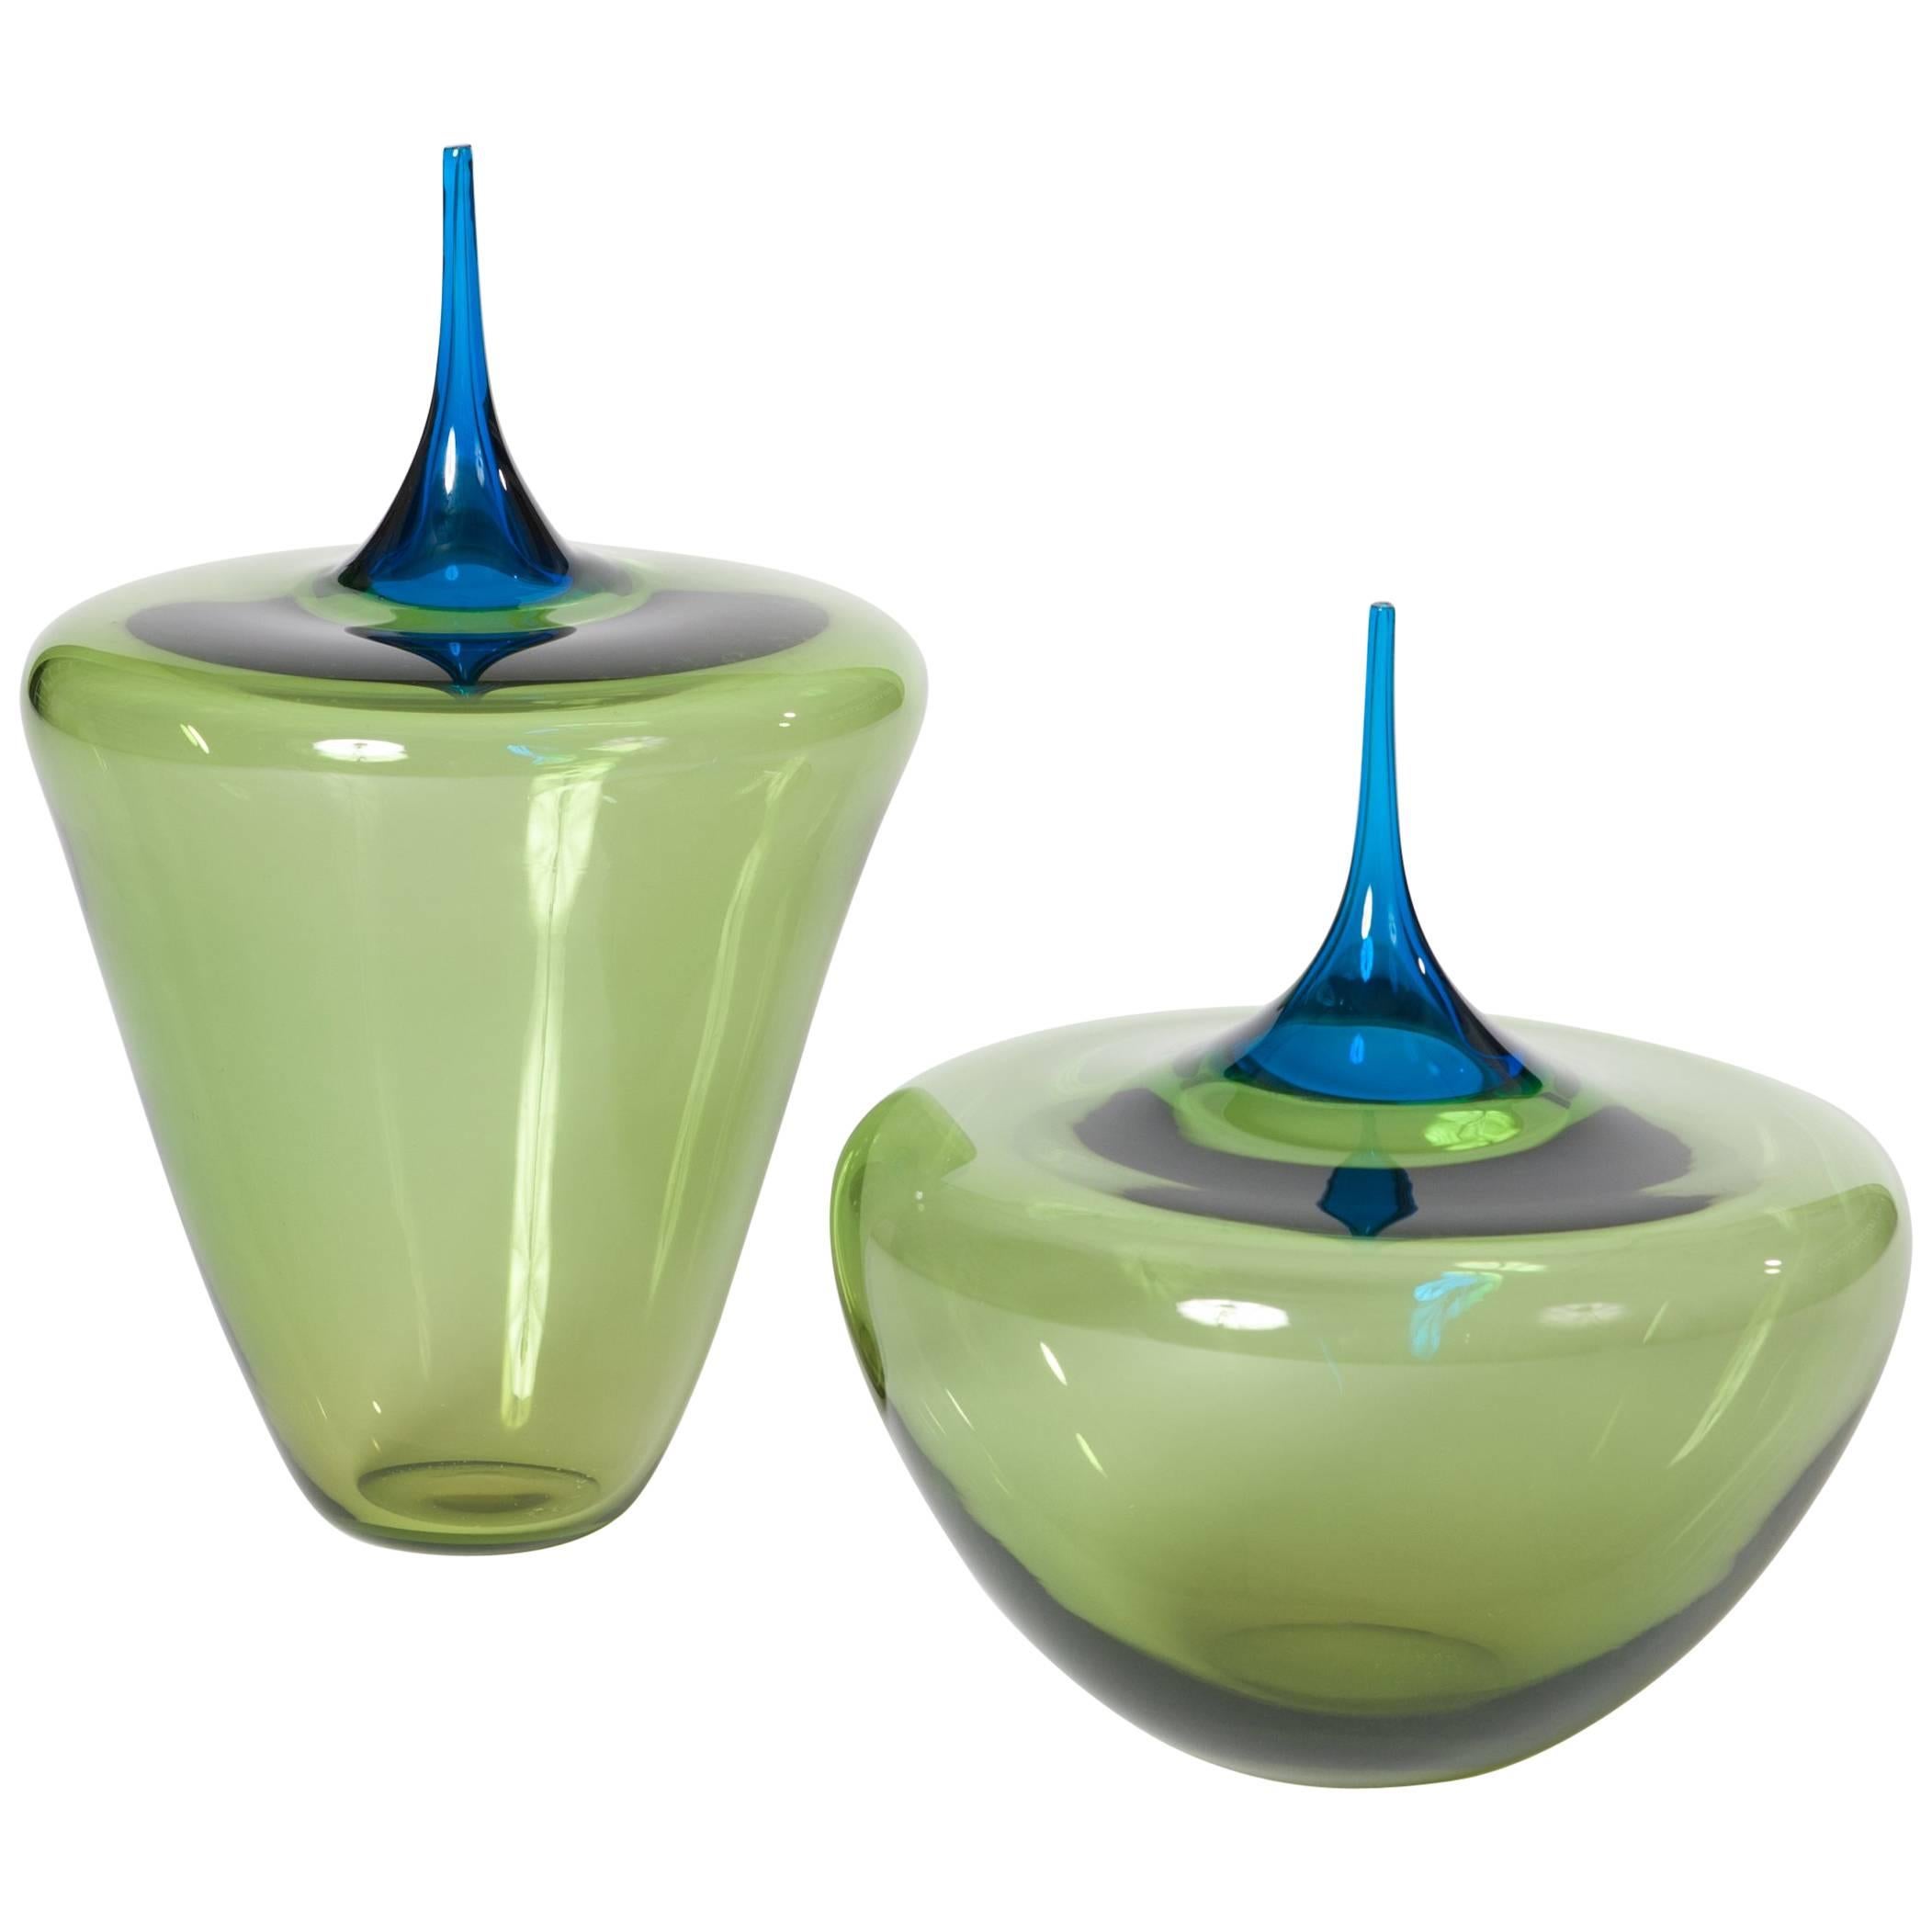 Modern Italian Pair of Grazile Green/Blue Murano Glass Vases Signed by P. Crepax